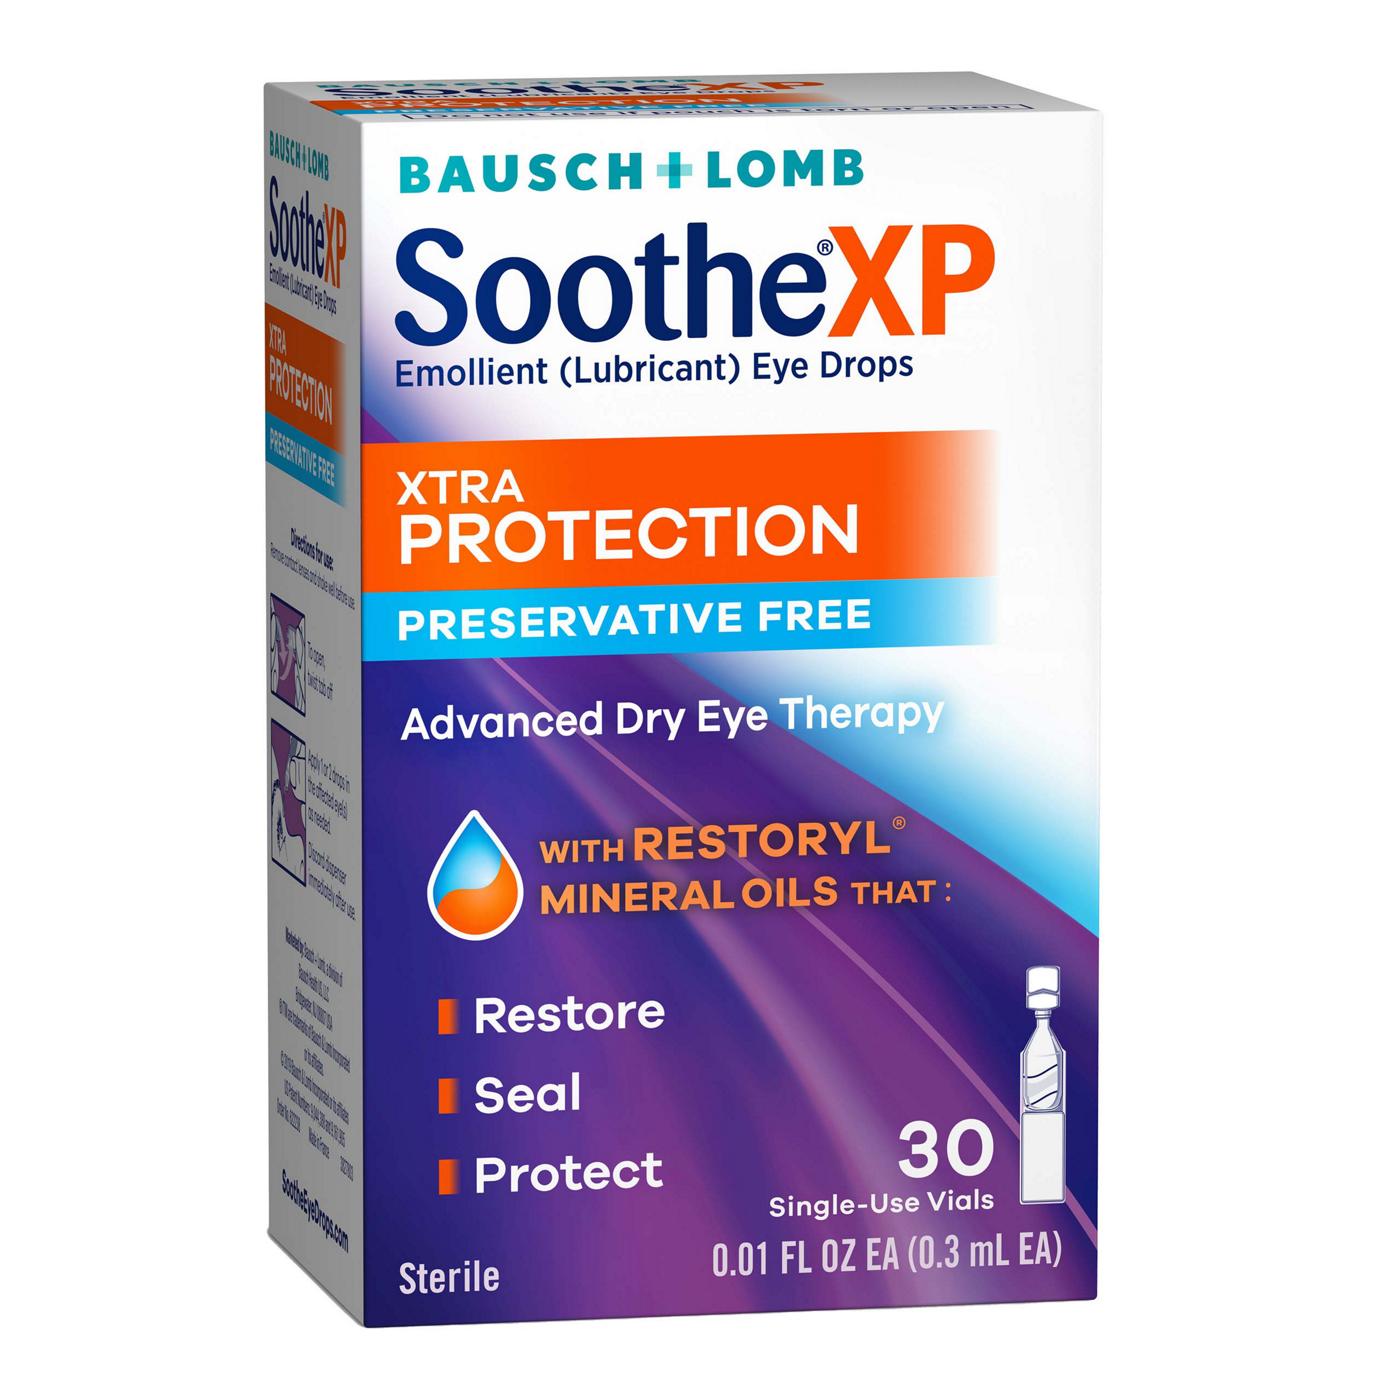 Bausch & Lomb Soothe XP Preservative Free Emollient Lubricant Eye Drops; image 1 of 3